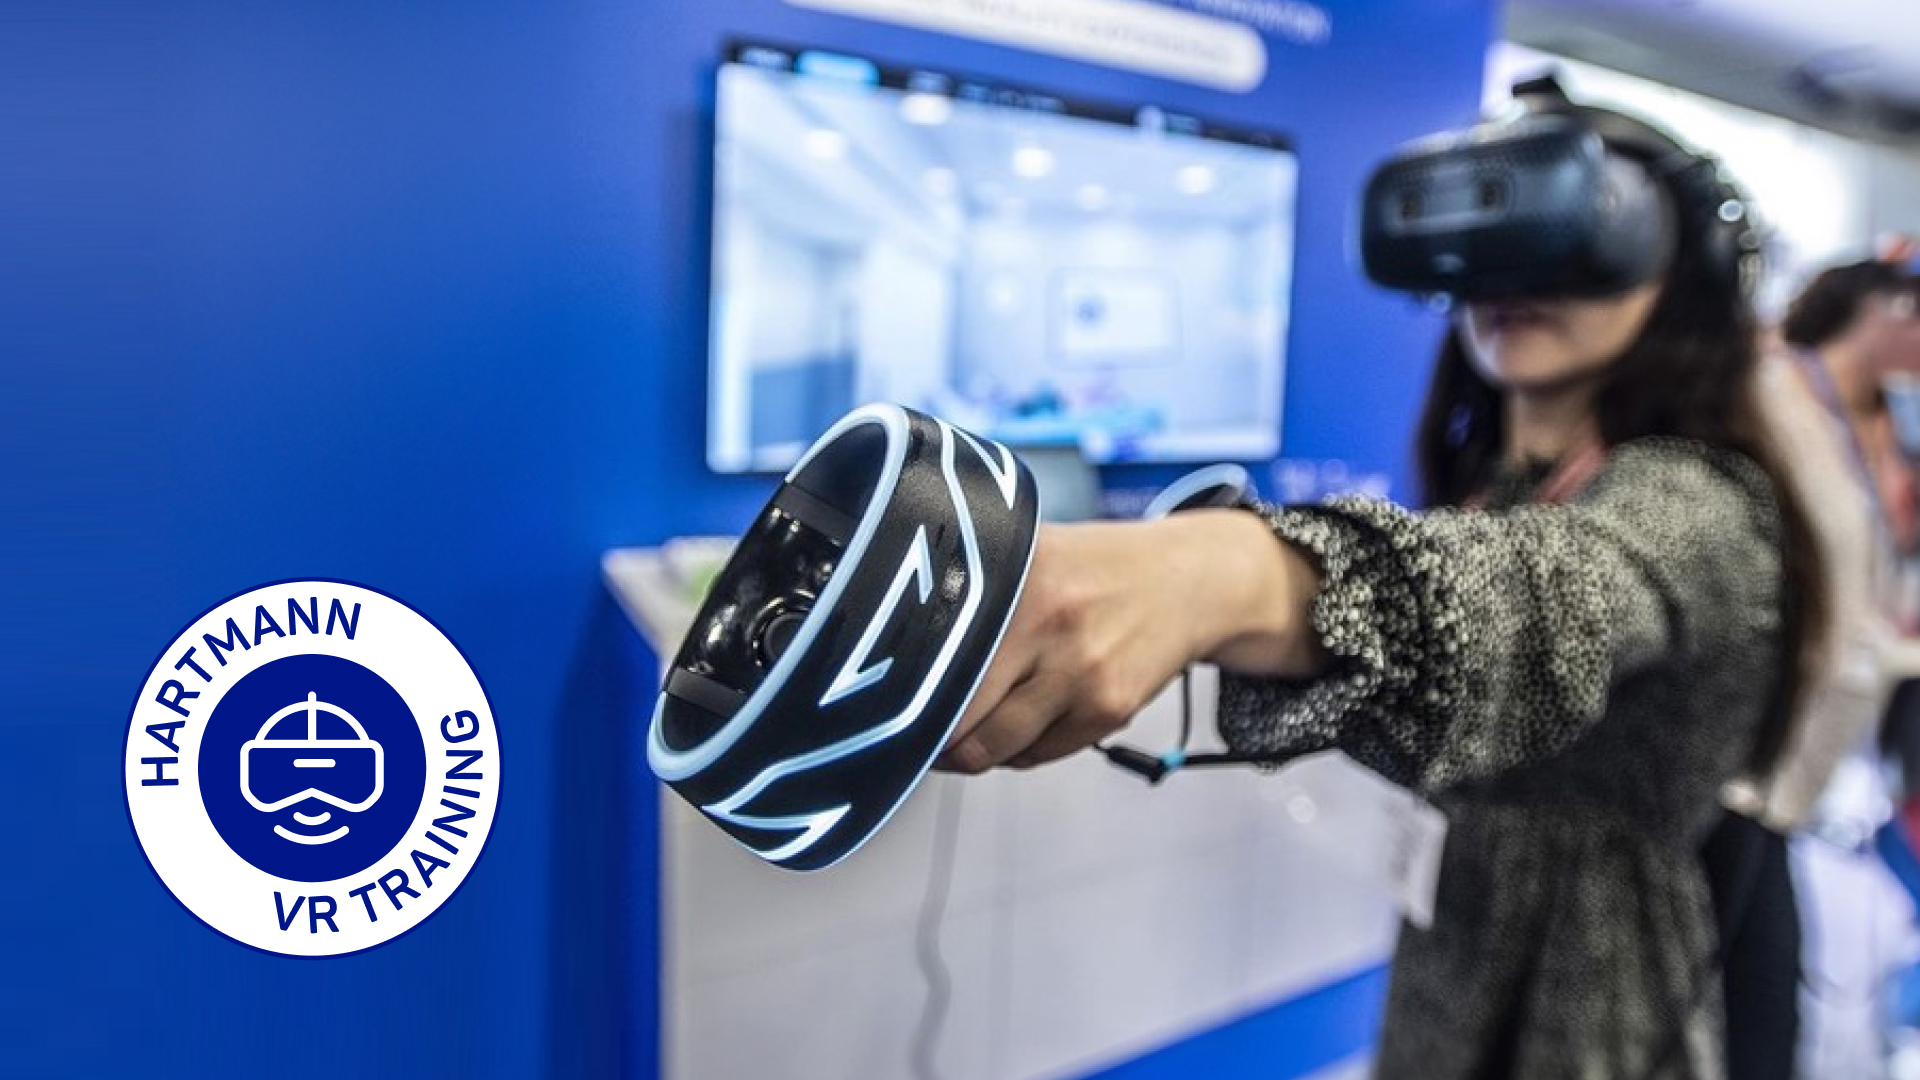 A woman wears a virtual reality headset and holds a joystick in her hand.